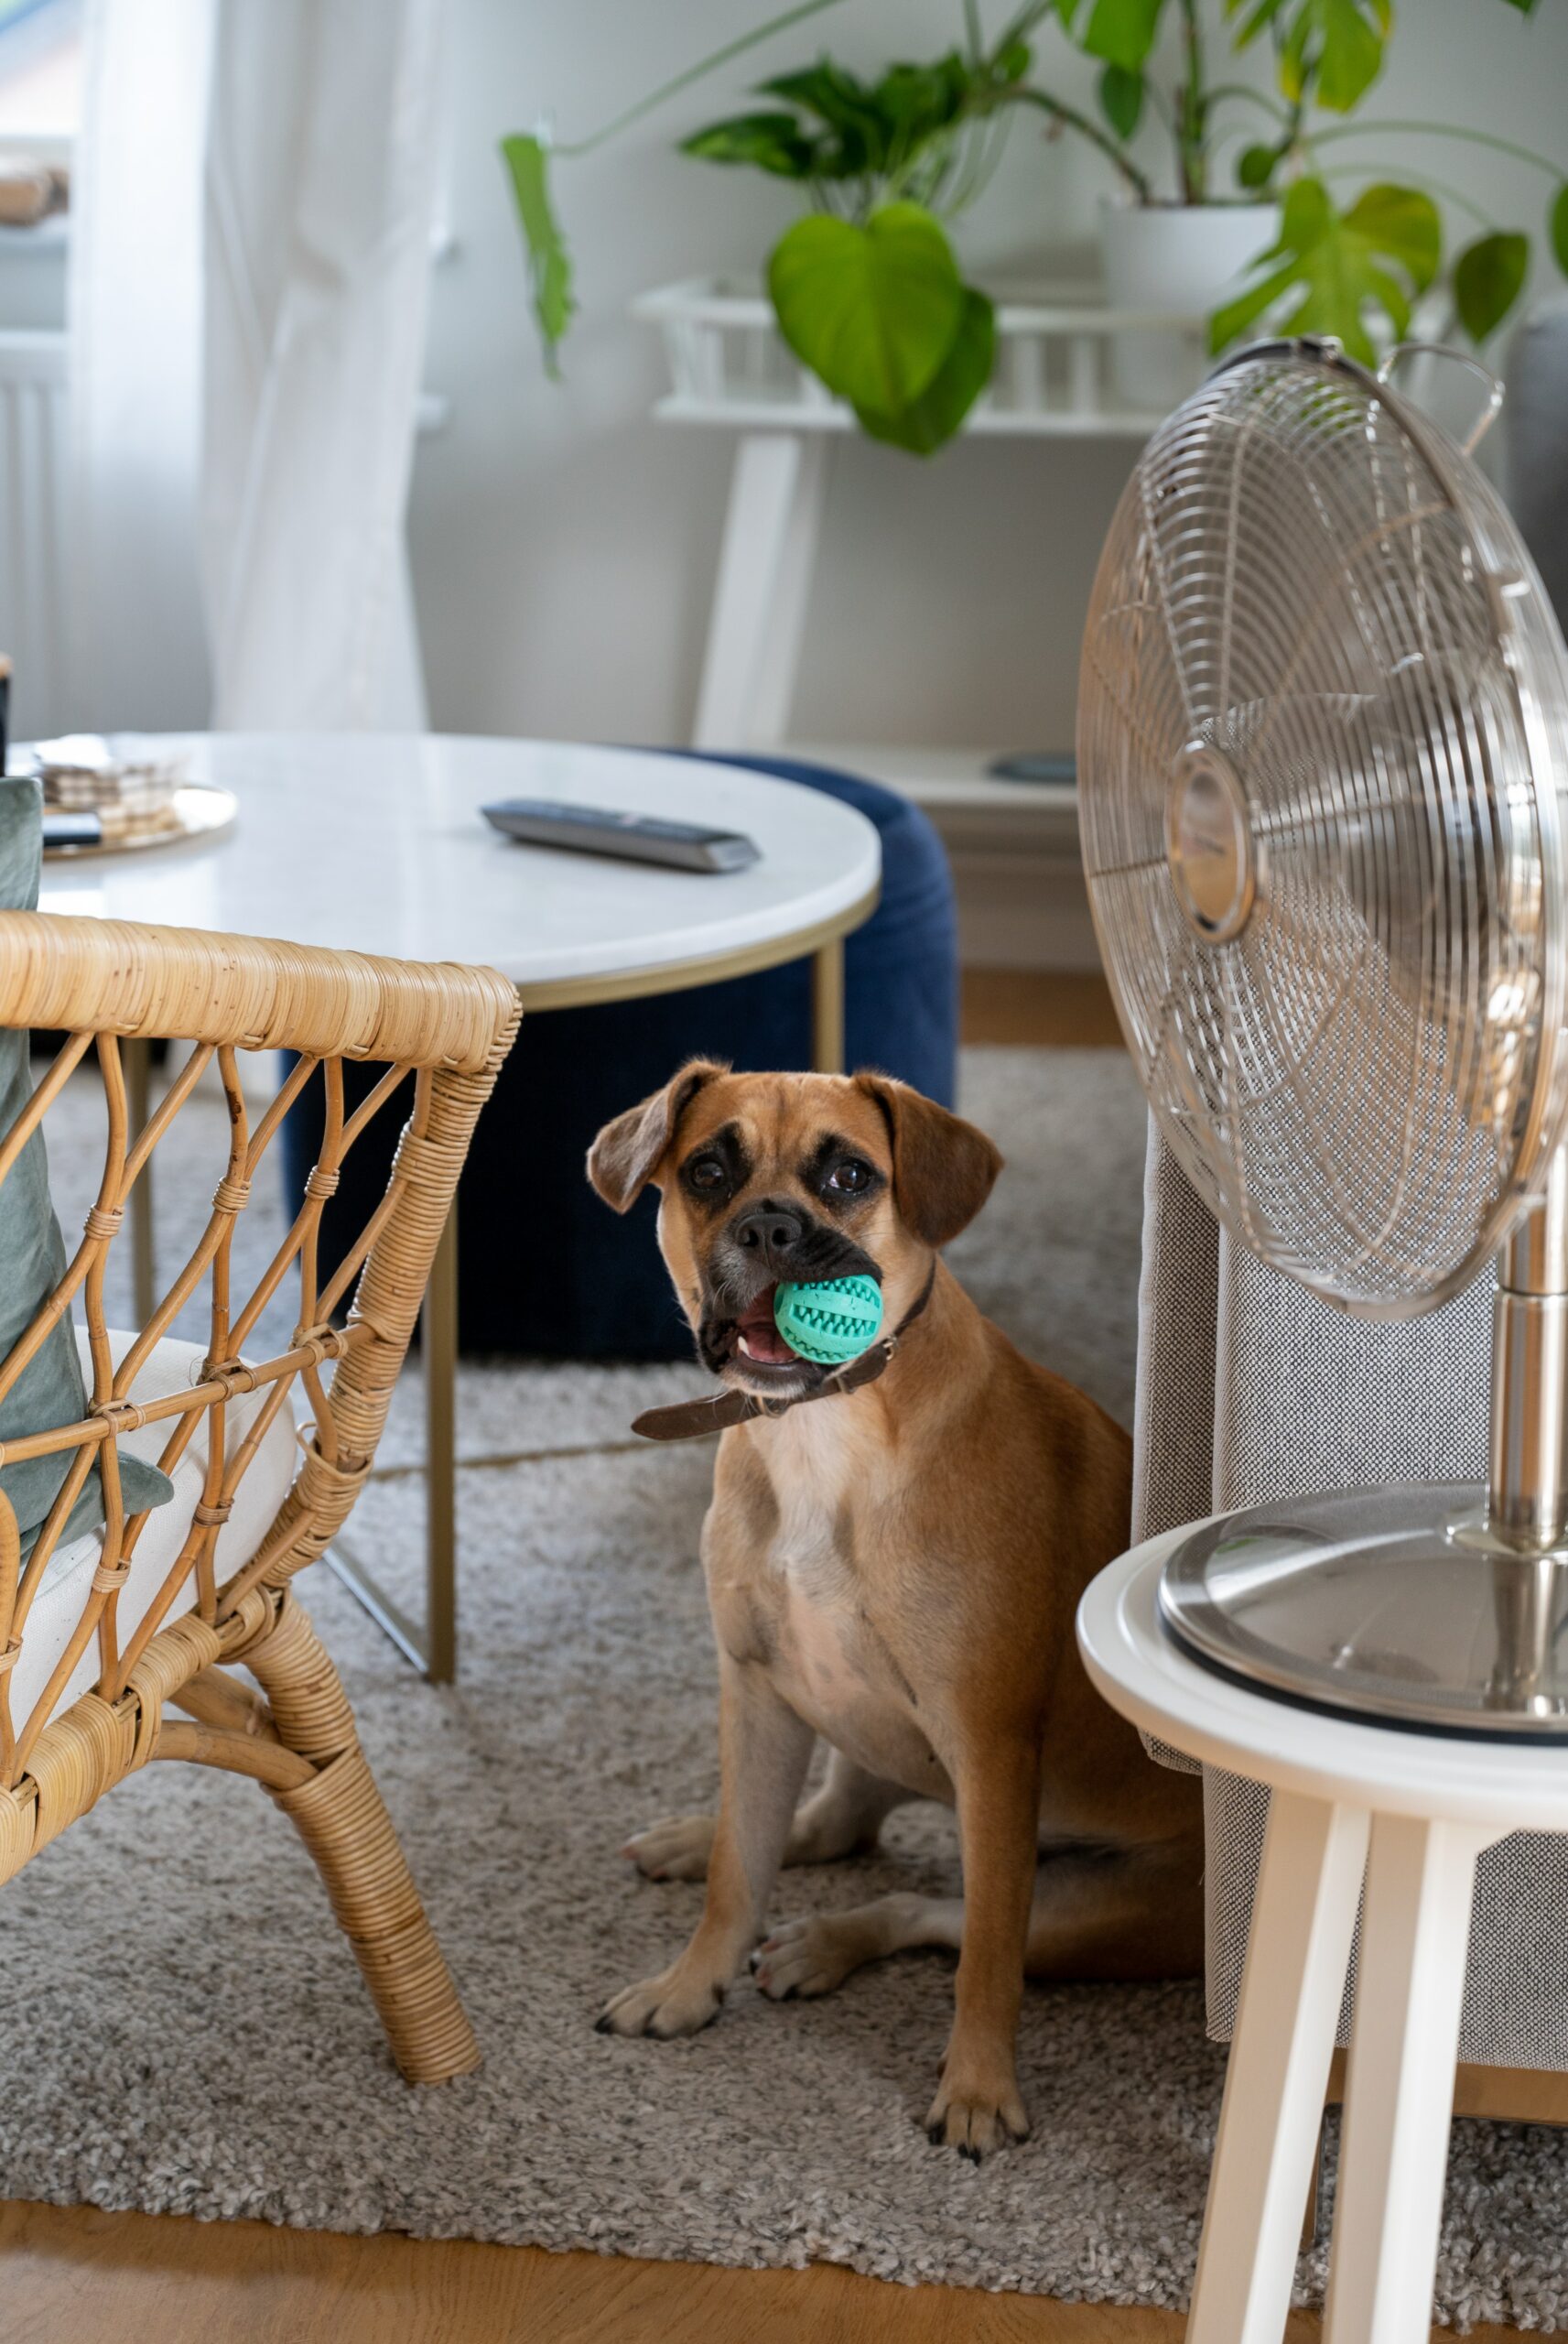 Should You Leave The Air Conditioner On For Your Pet?